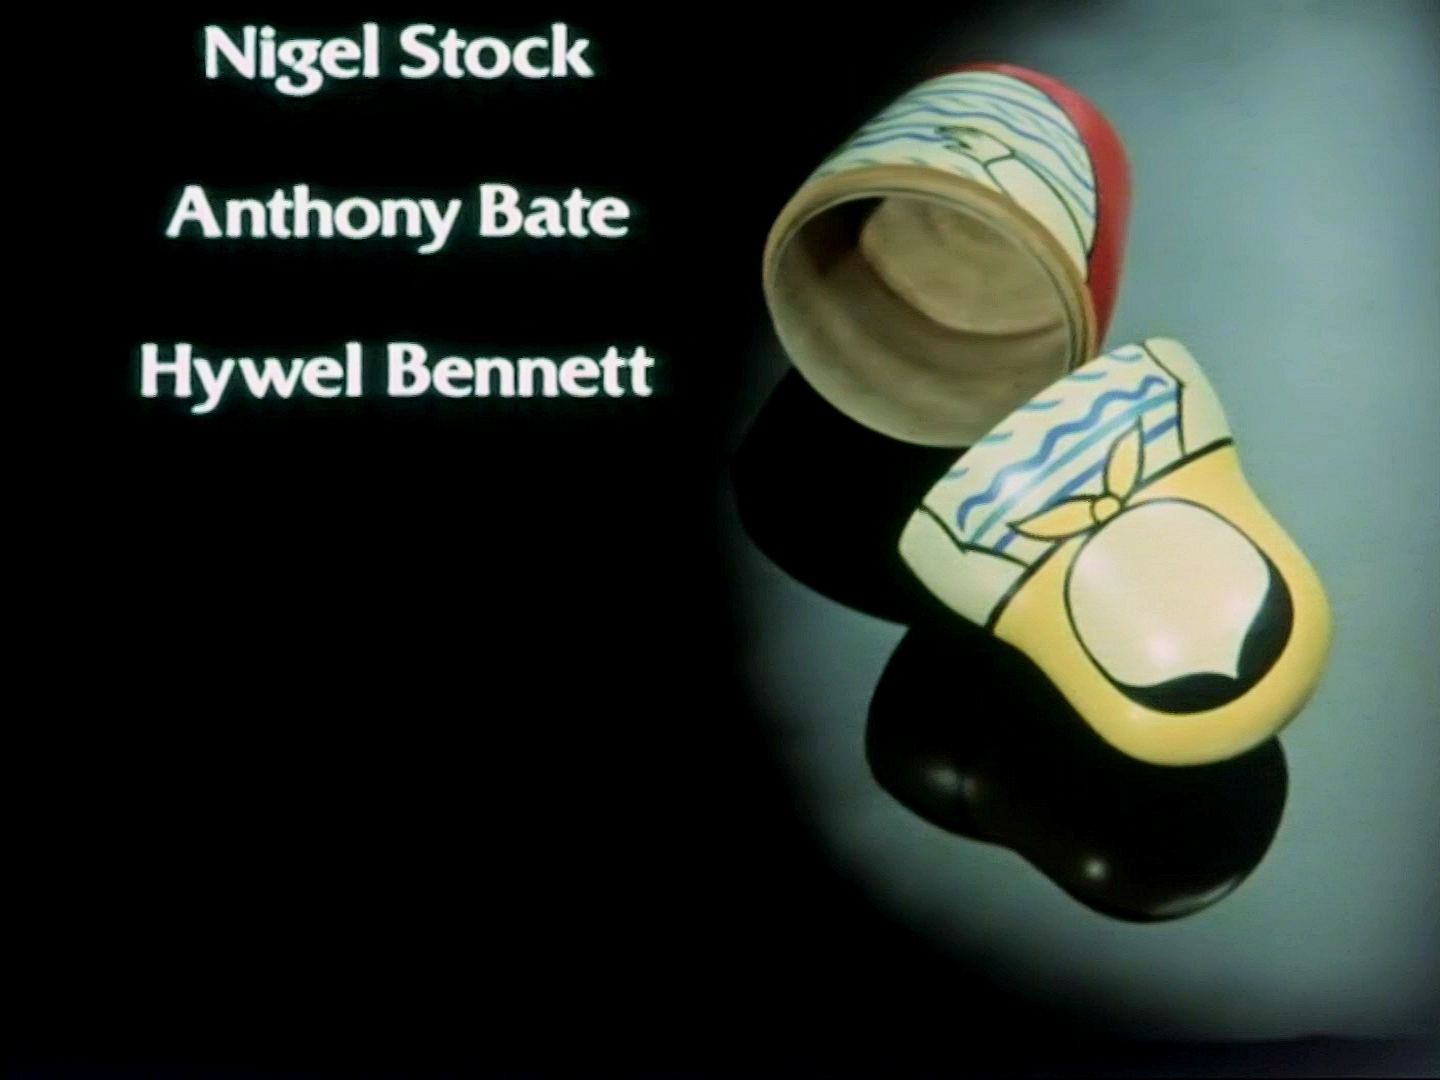 Main title from the 1979 ‘Part One’ episode of Tinker Tailor Soldier Spy (1979) (6). Nigel Stock, Anthony Bate, Hywel Bennett